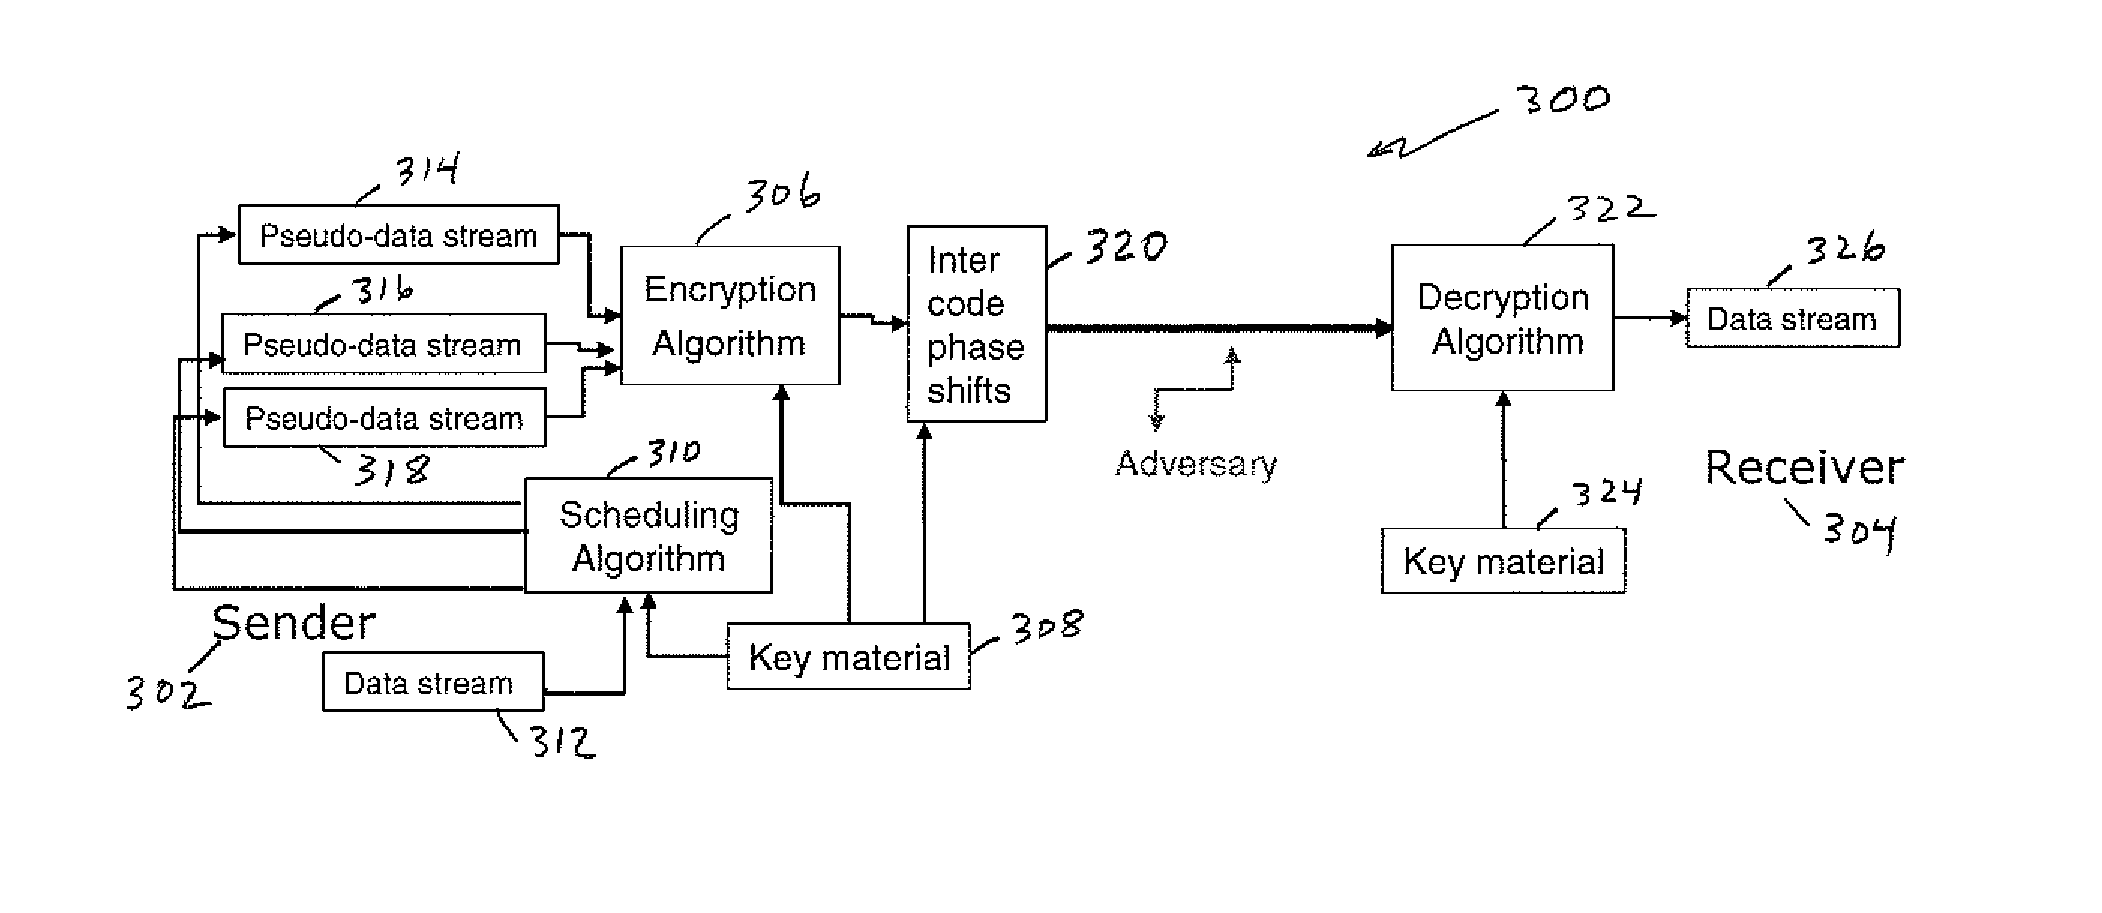 OCDM-based photonic encryption system with provable security